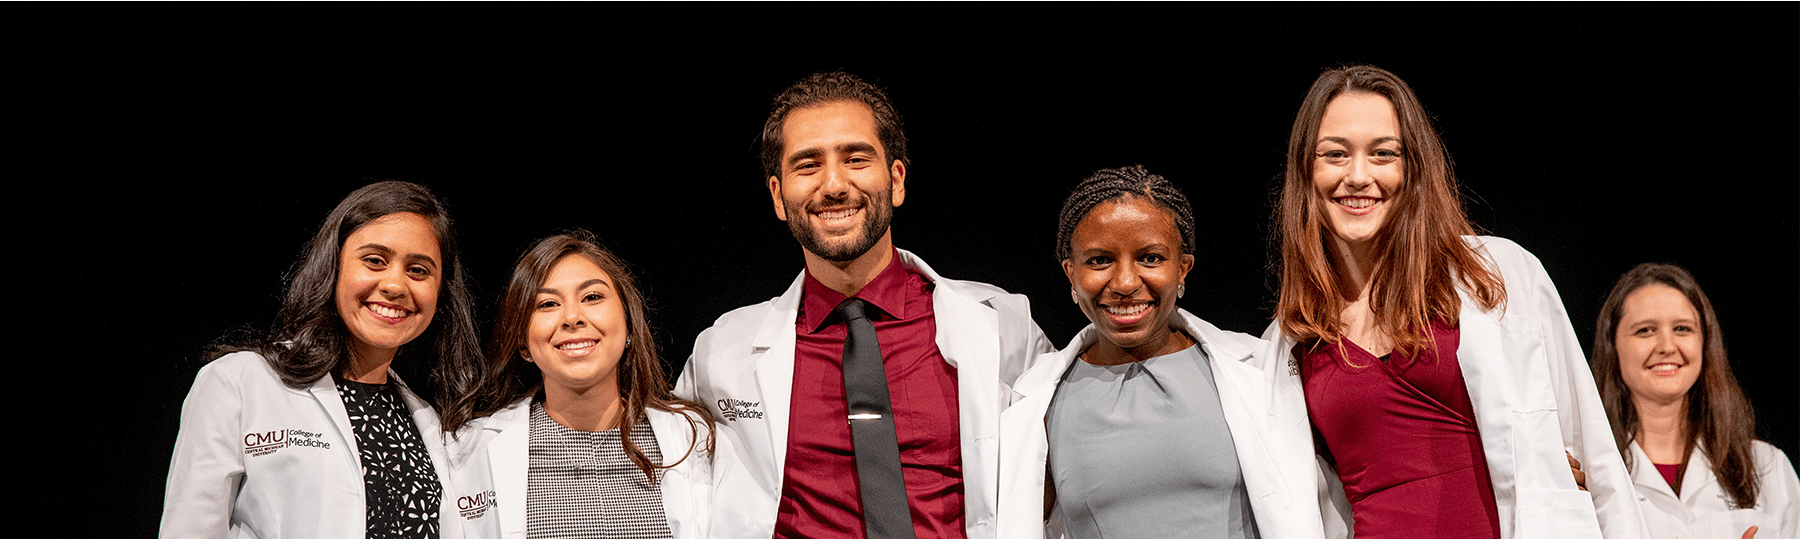 Medical students of varying genders and races stand together wearing white doctors' coats.